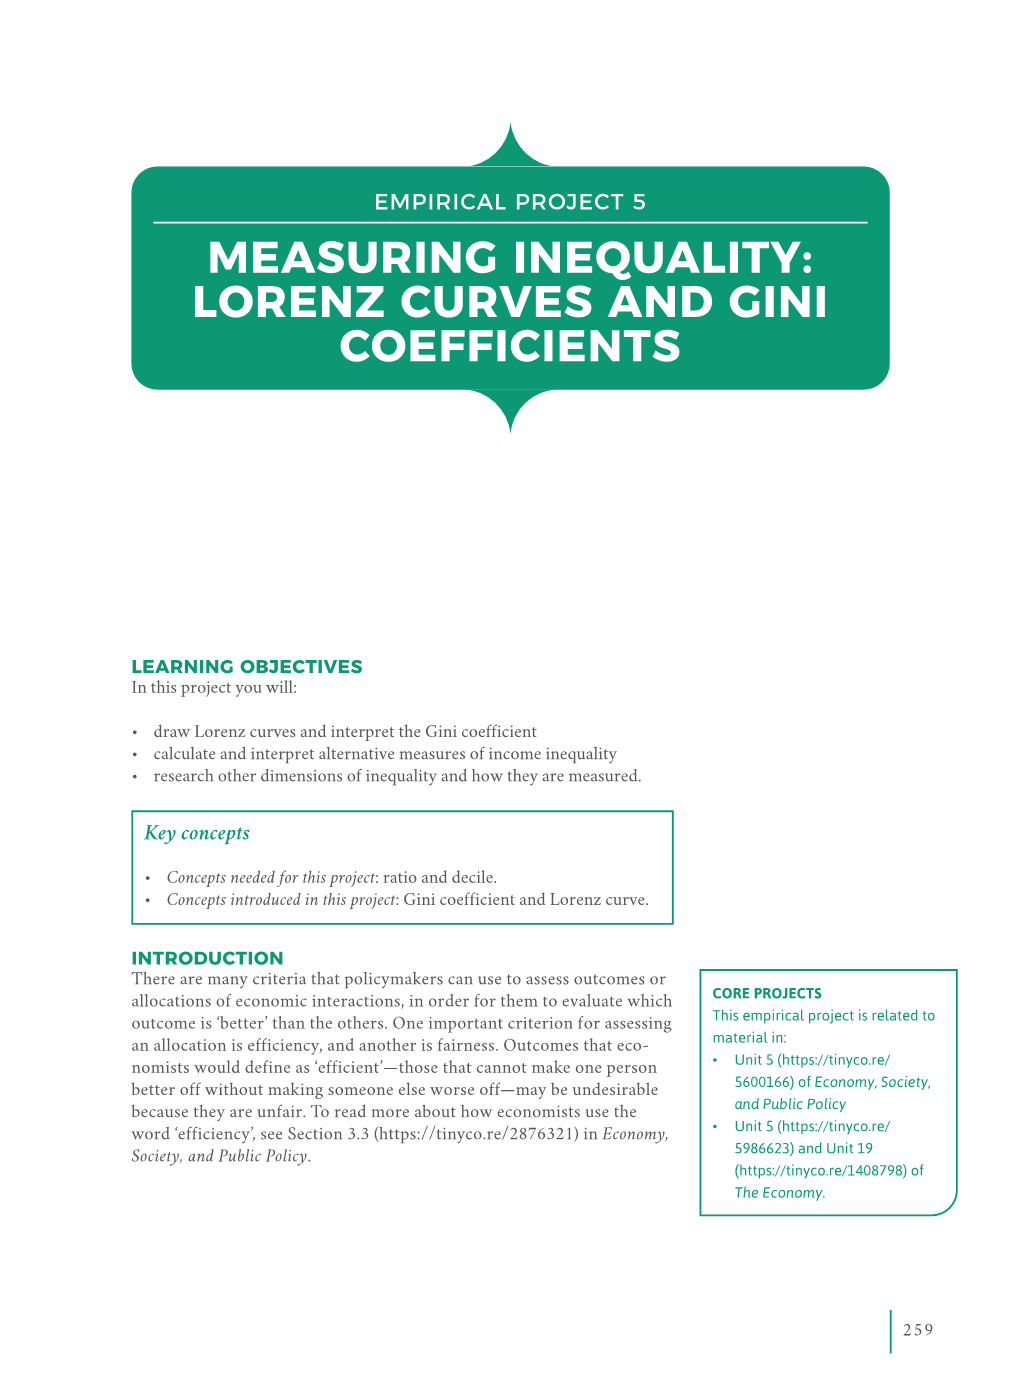 Measuring Inequality: Lorenz Curves and Gini Coefficients